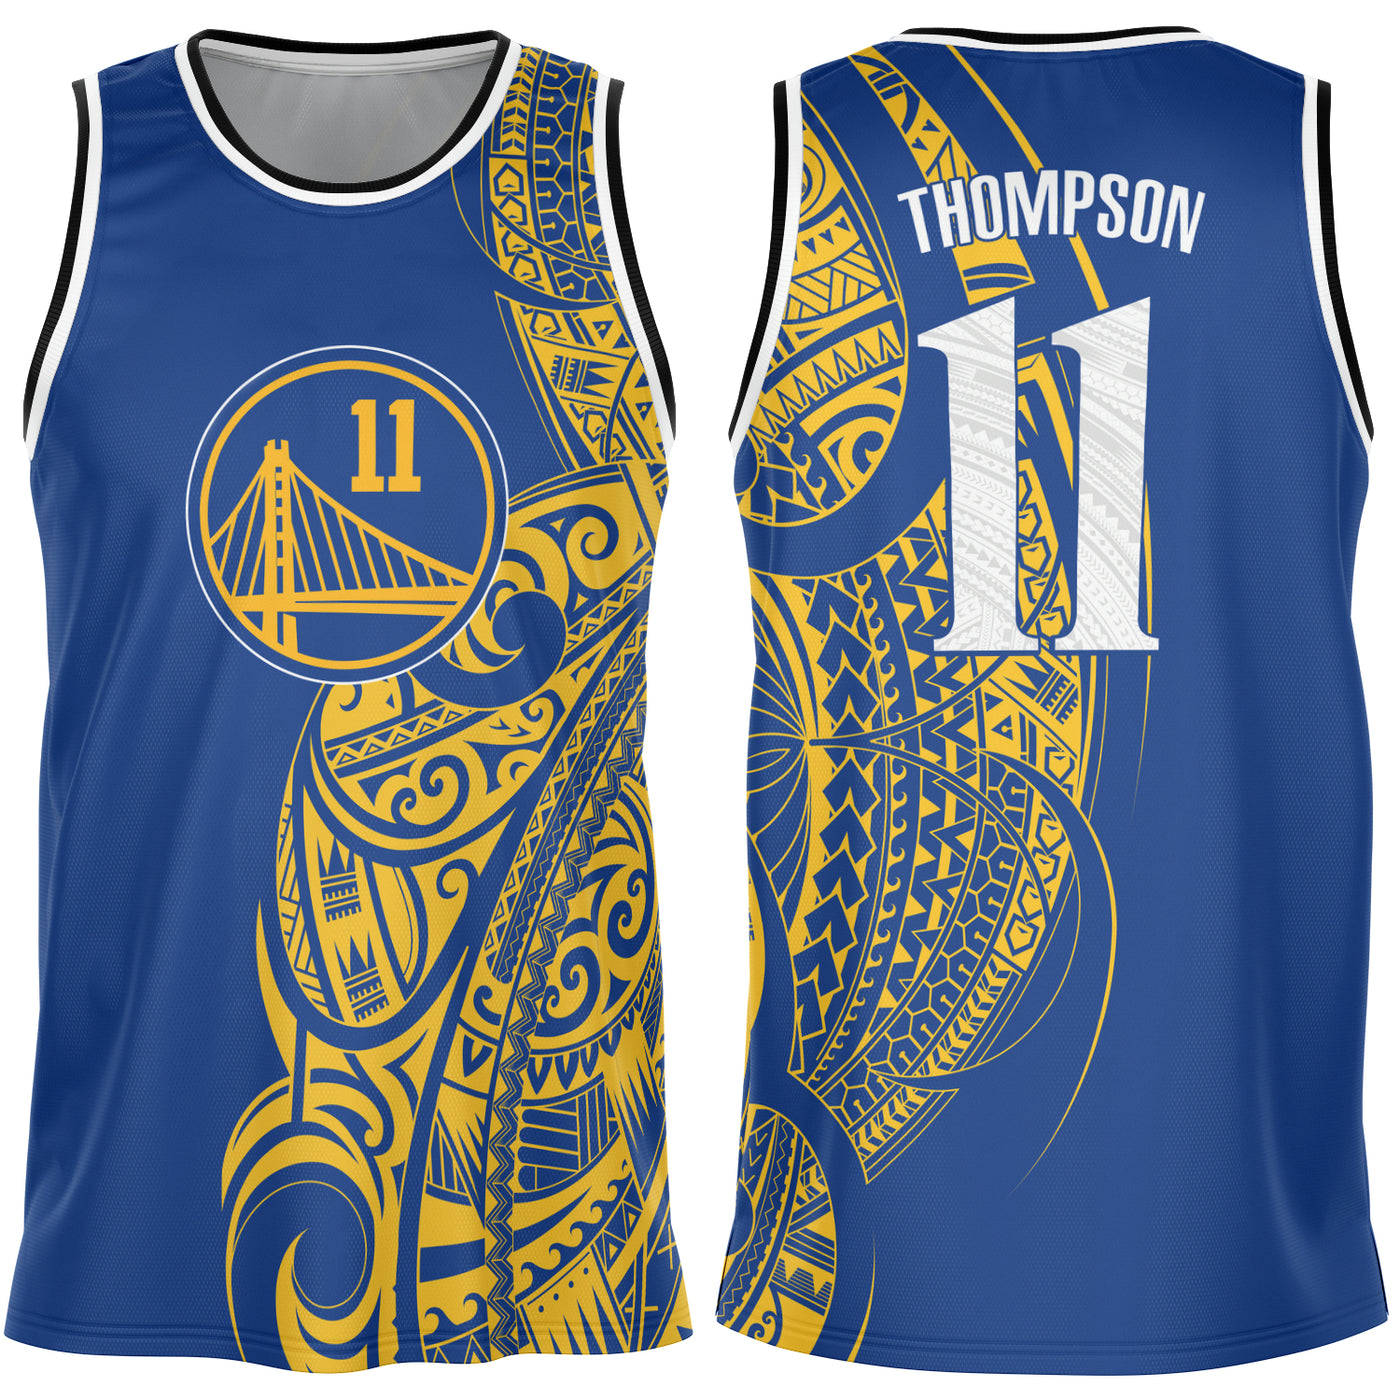 klay thompson jersey black and gold